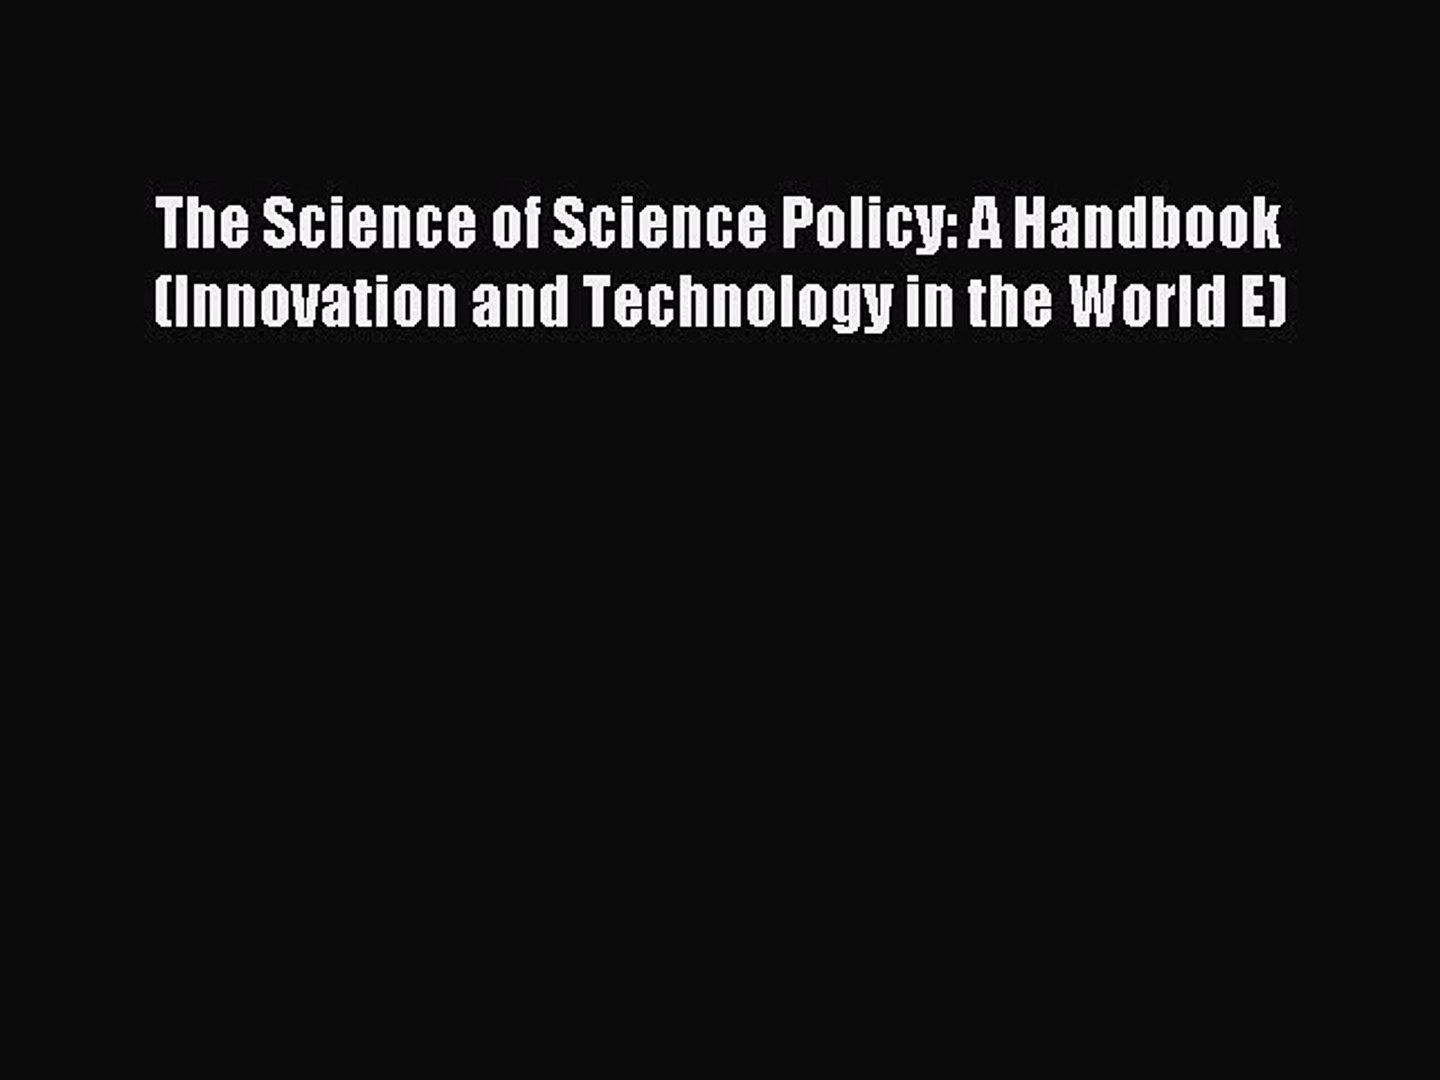 Download The Science of Science Policy: A Handbook (Innovation and Technology in the World